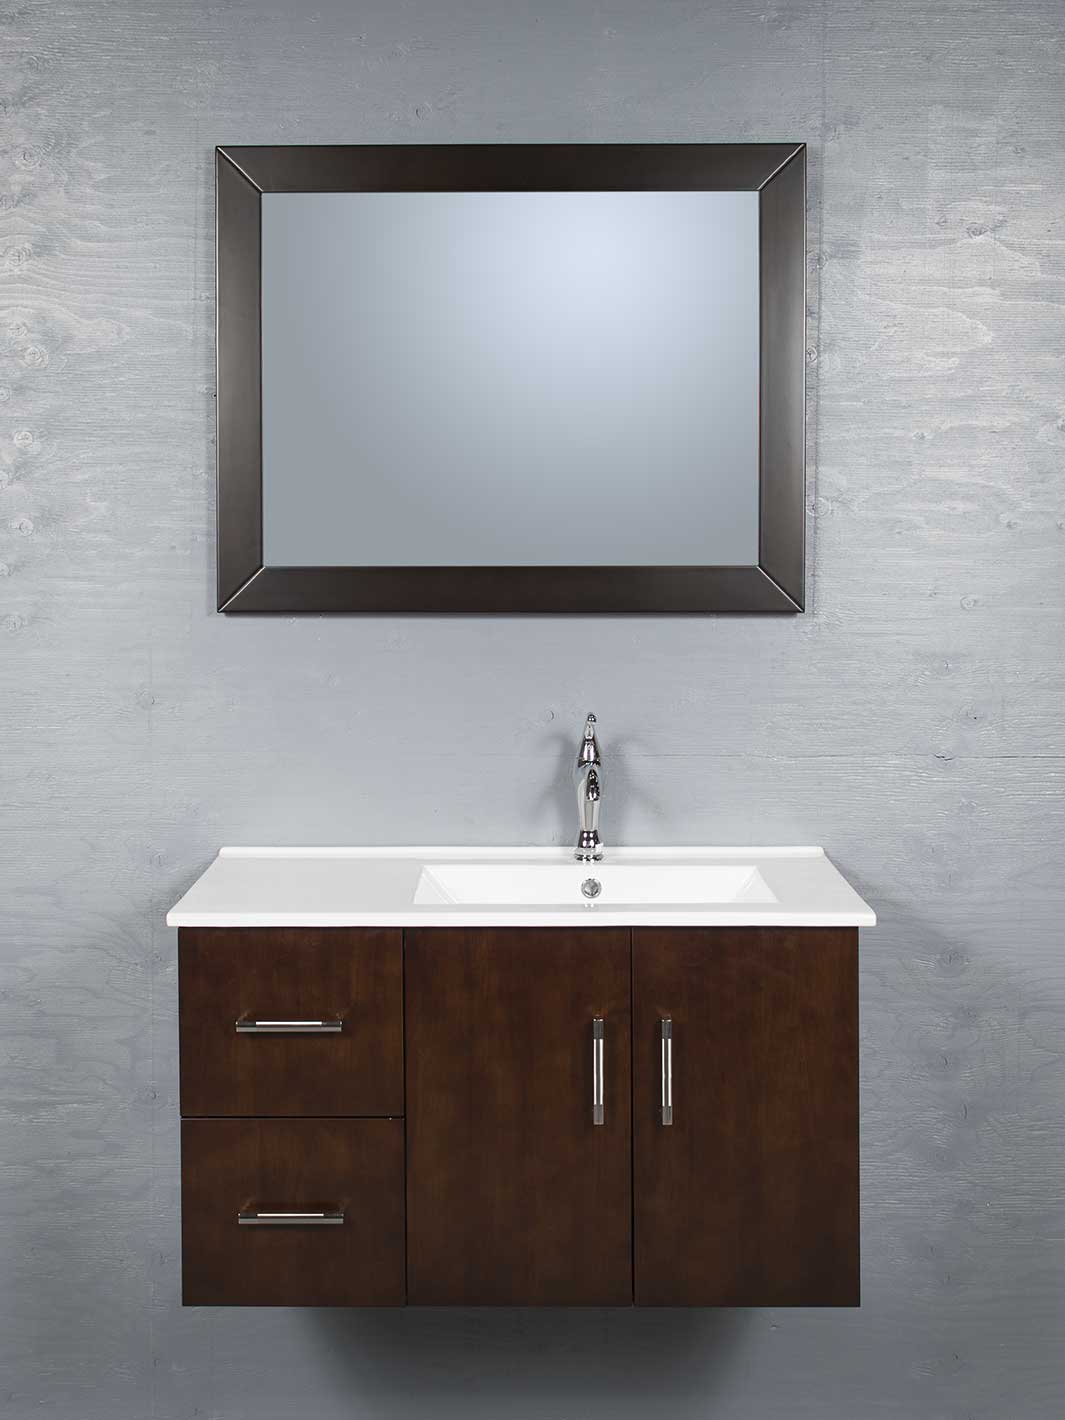 36" Vanity - Style 2036 (Sink Right)